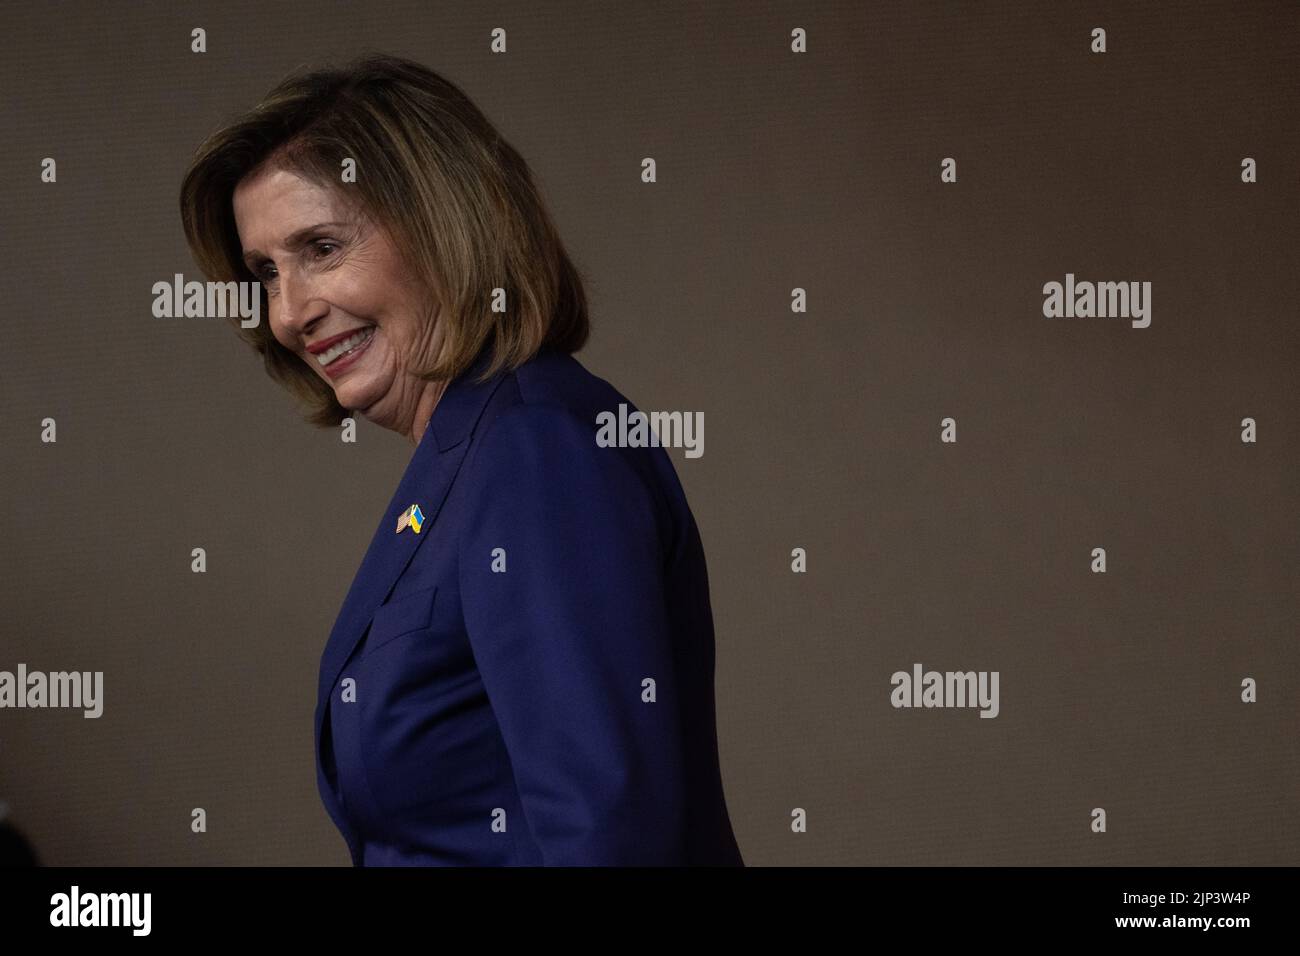 Washington, United States Of America. 29th July, 2022. Speaker of the United States House of Representatives Nancy Pelosi (Democrat of California) departs after holding a news conference on Capitol Hill in Washington, DC, Friday, July 29, 2022. Credit: Chris Kleponis/CNP/AdMedia/Newscom/Alamy Live News Stock Photo